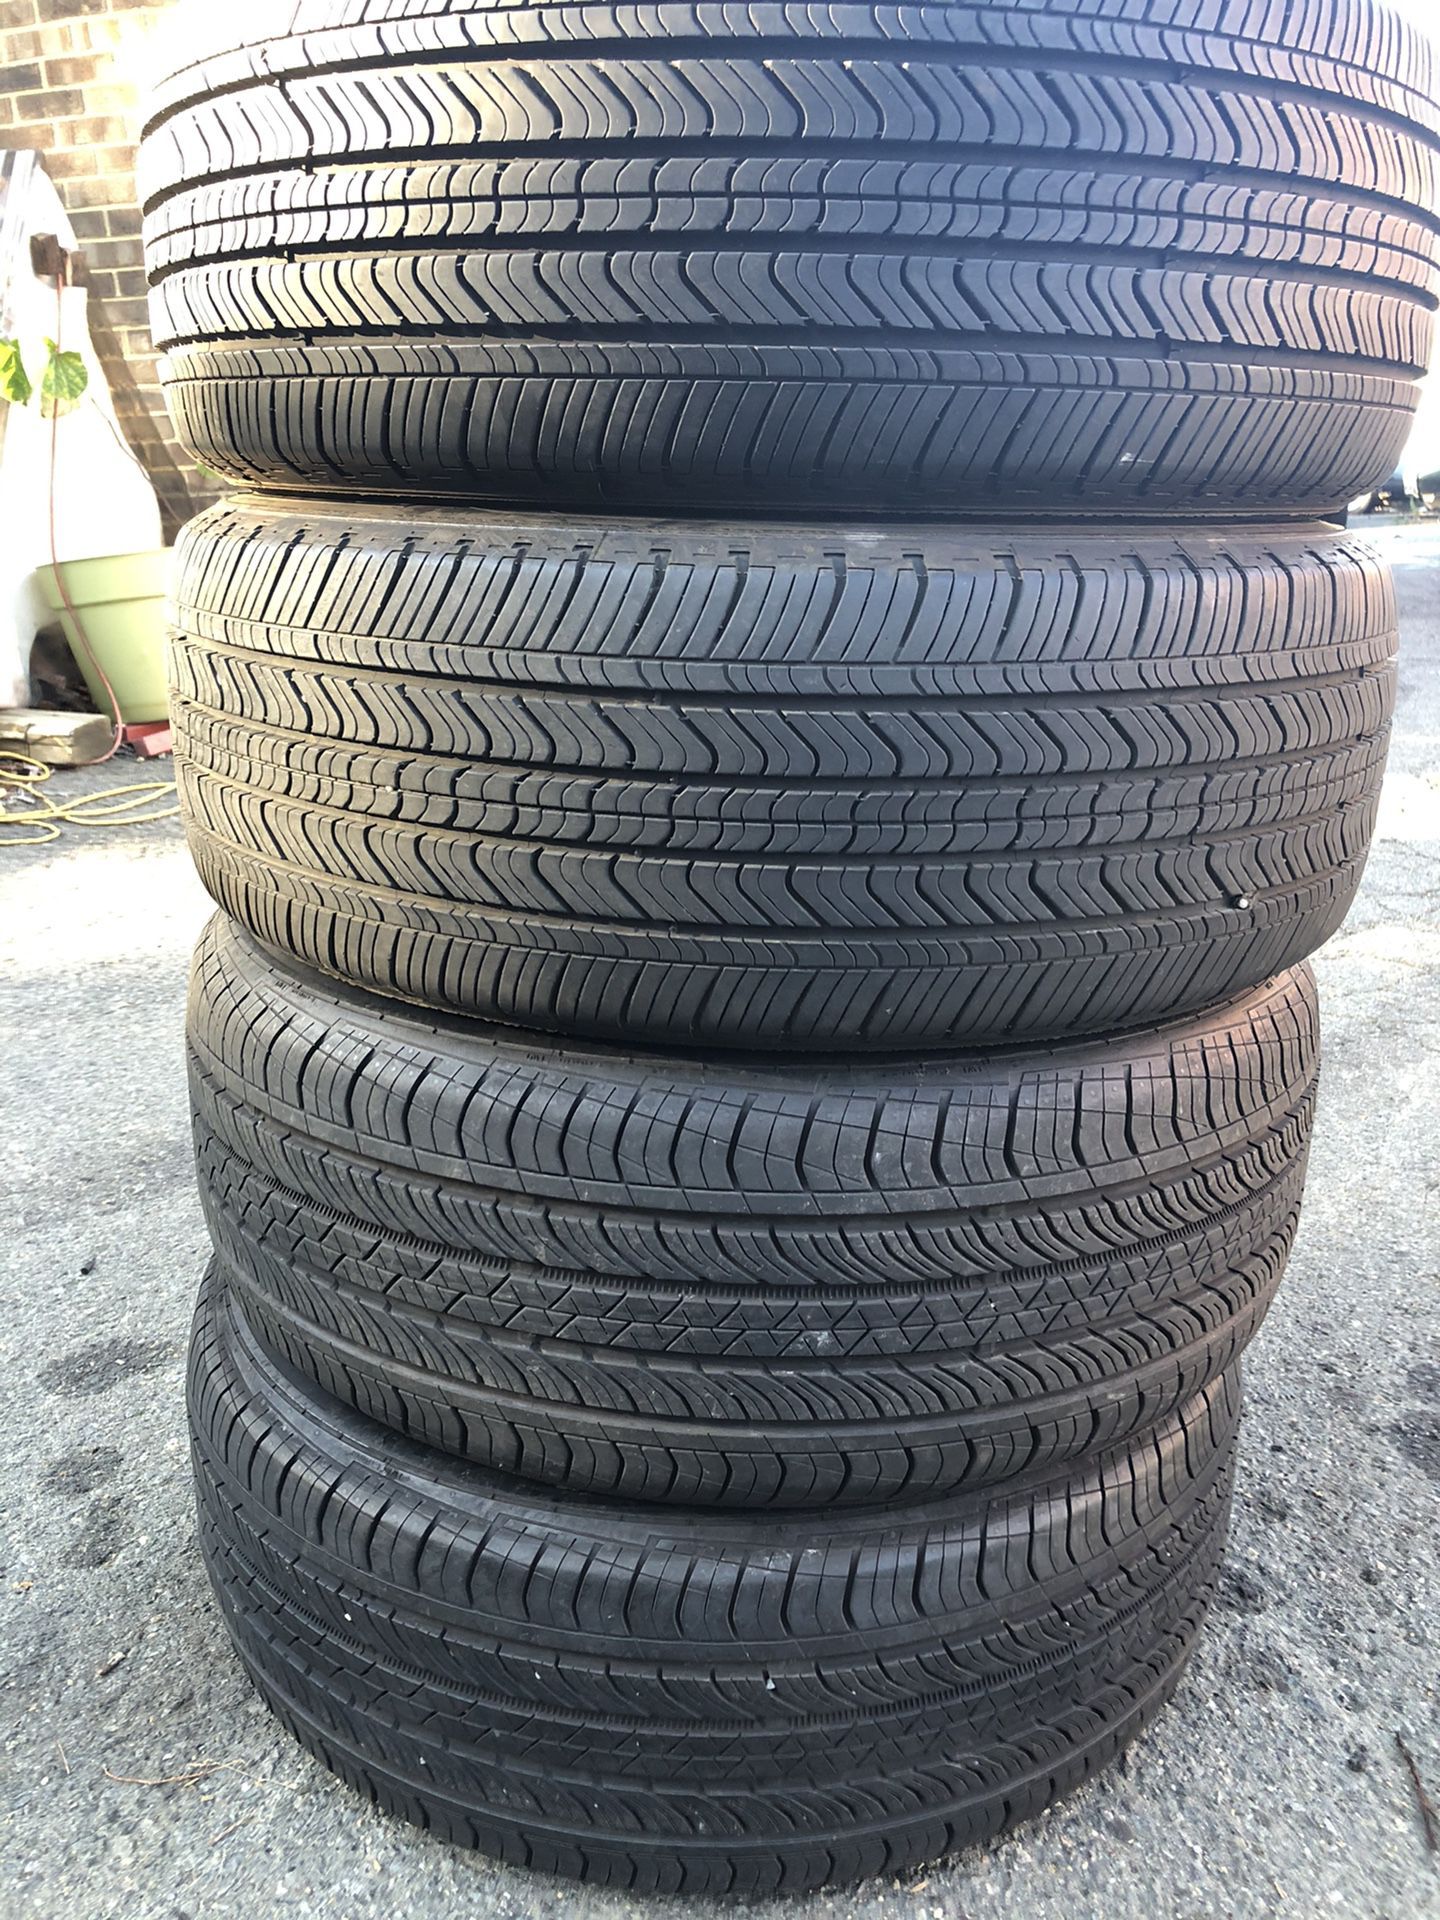 Set 4 usted tire 215/55R17 two MICHELIN and two Continental three used tire have patch set 4 used tire $170 4 llantas usadas 215/55R17 2 MICHELIN y 2